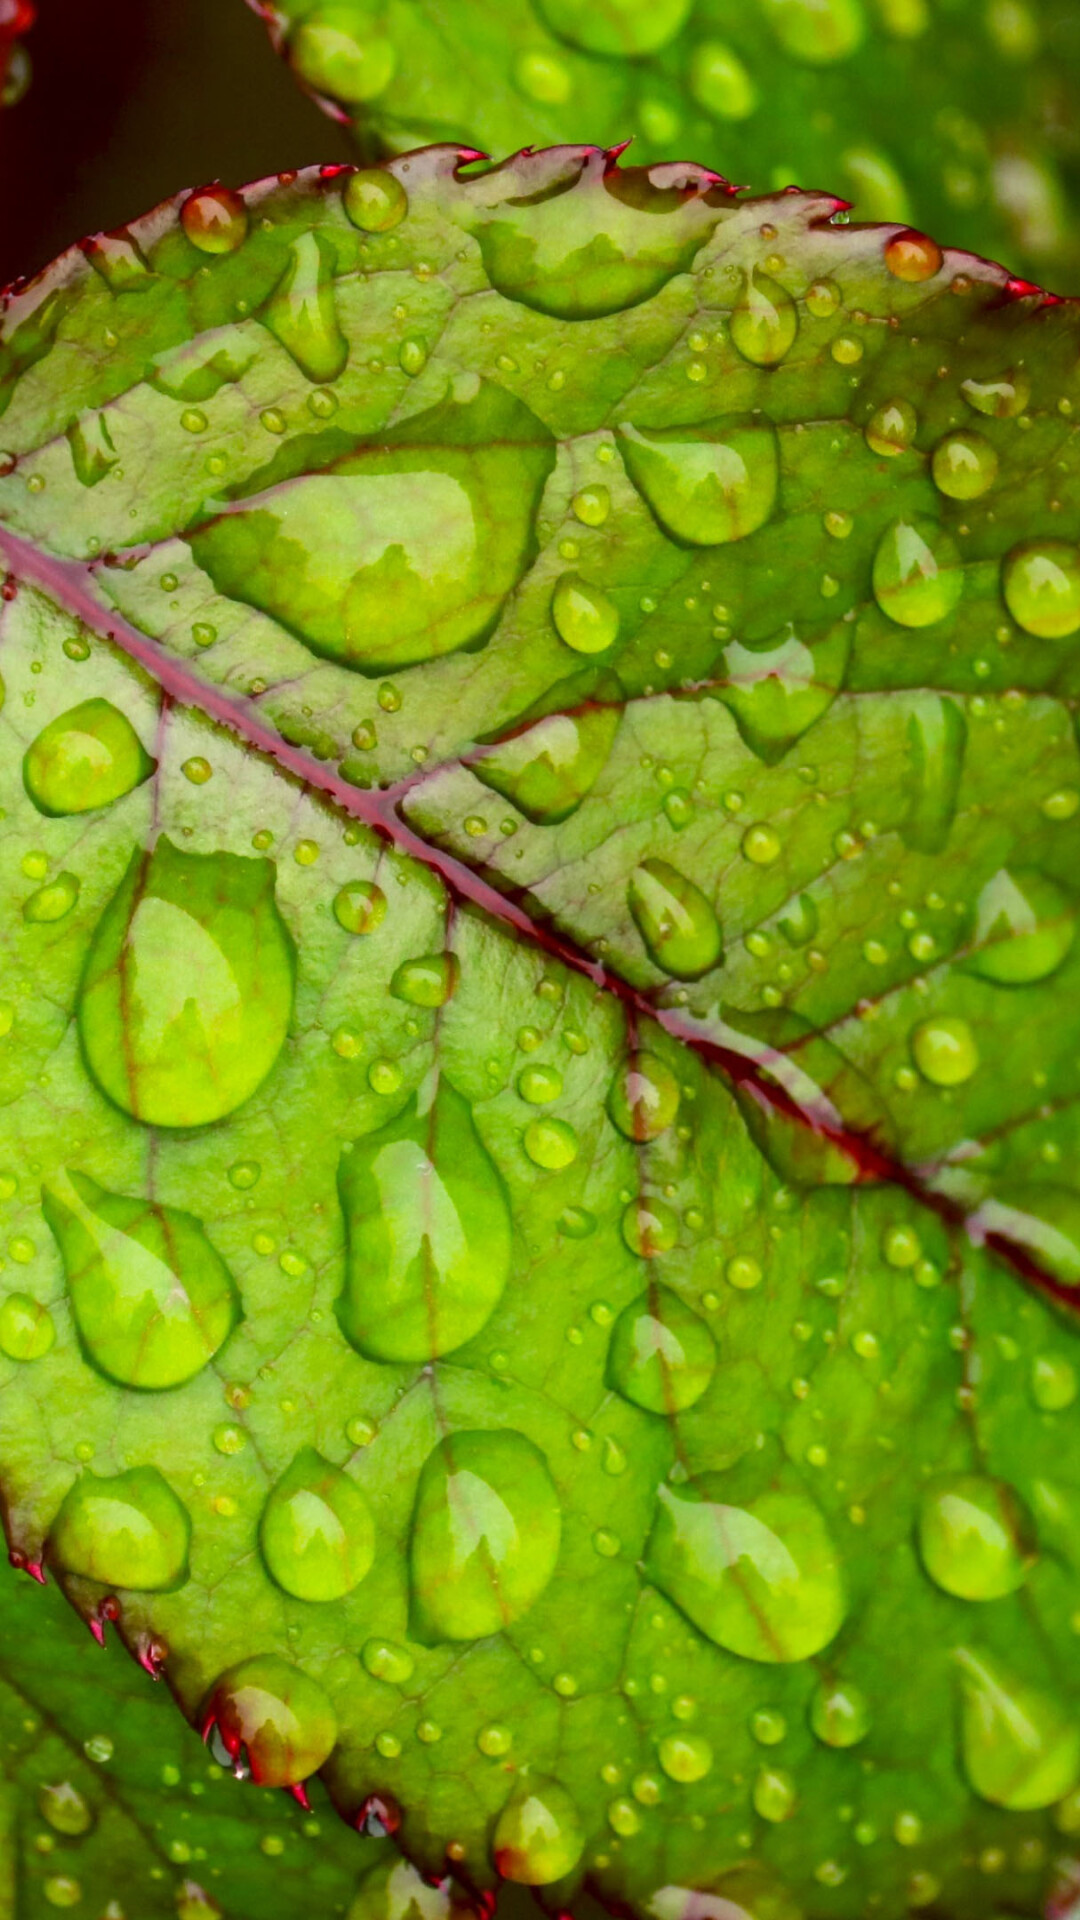 Go Green: Moisture evaporating from plants, Leaves dripping water, Chlorophyll. 1080x1920 Full HD Wallpaper.